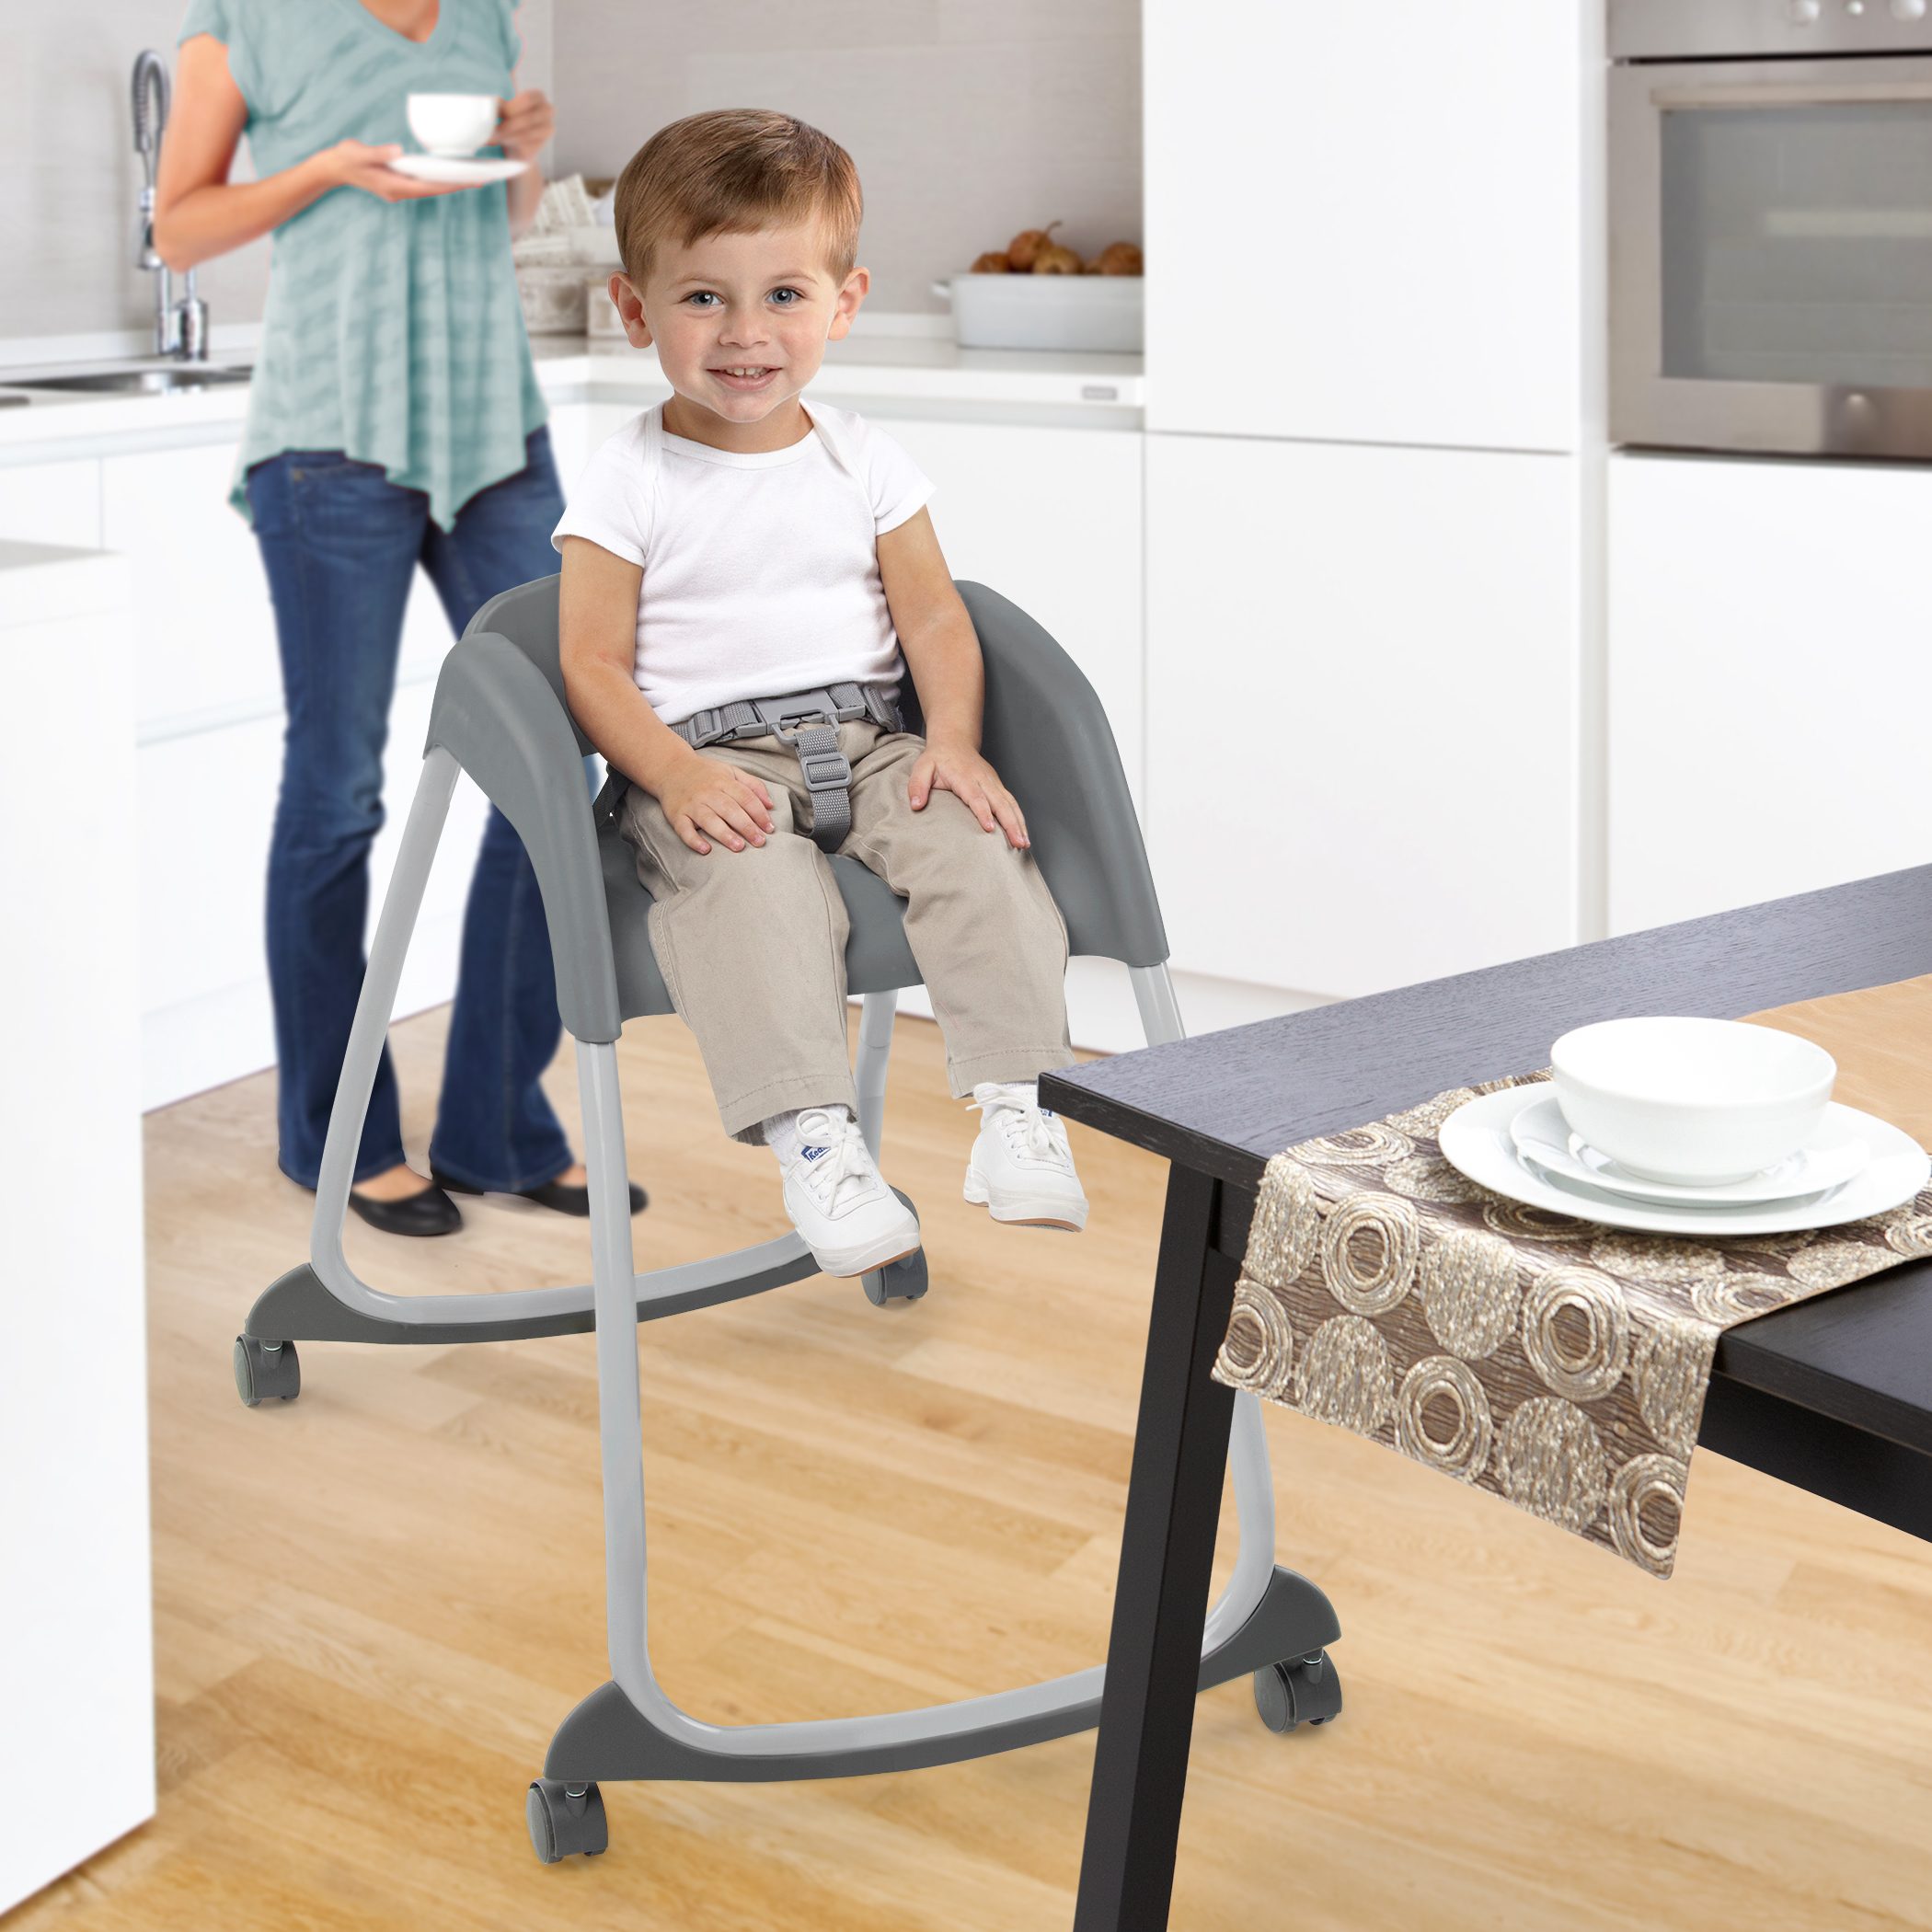 Ingenuity Trio 3-in-1 High Chair - Avondale - image 2 of 4